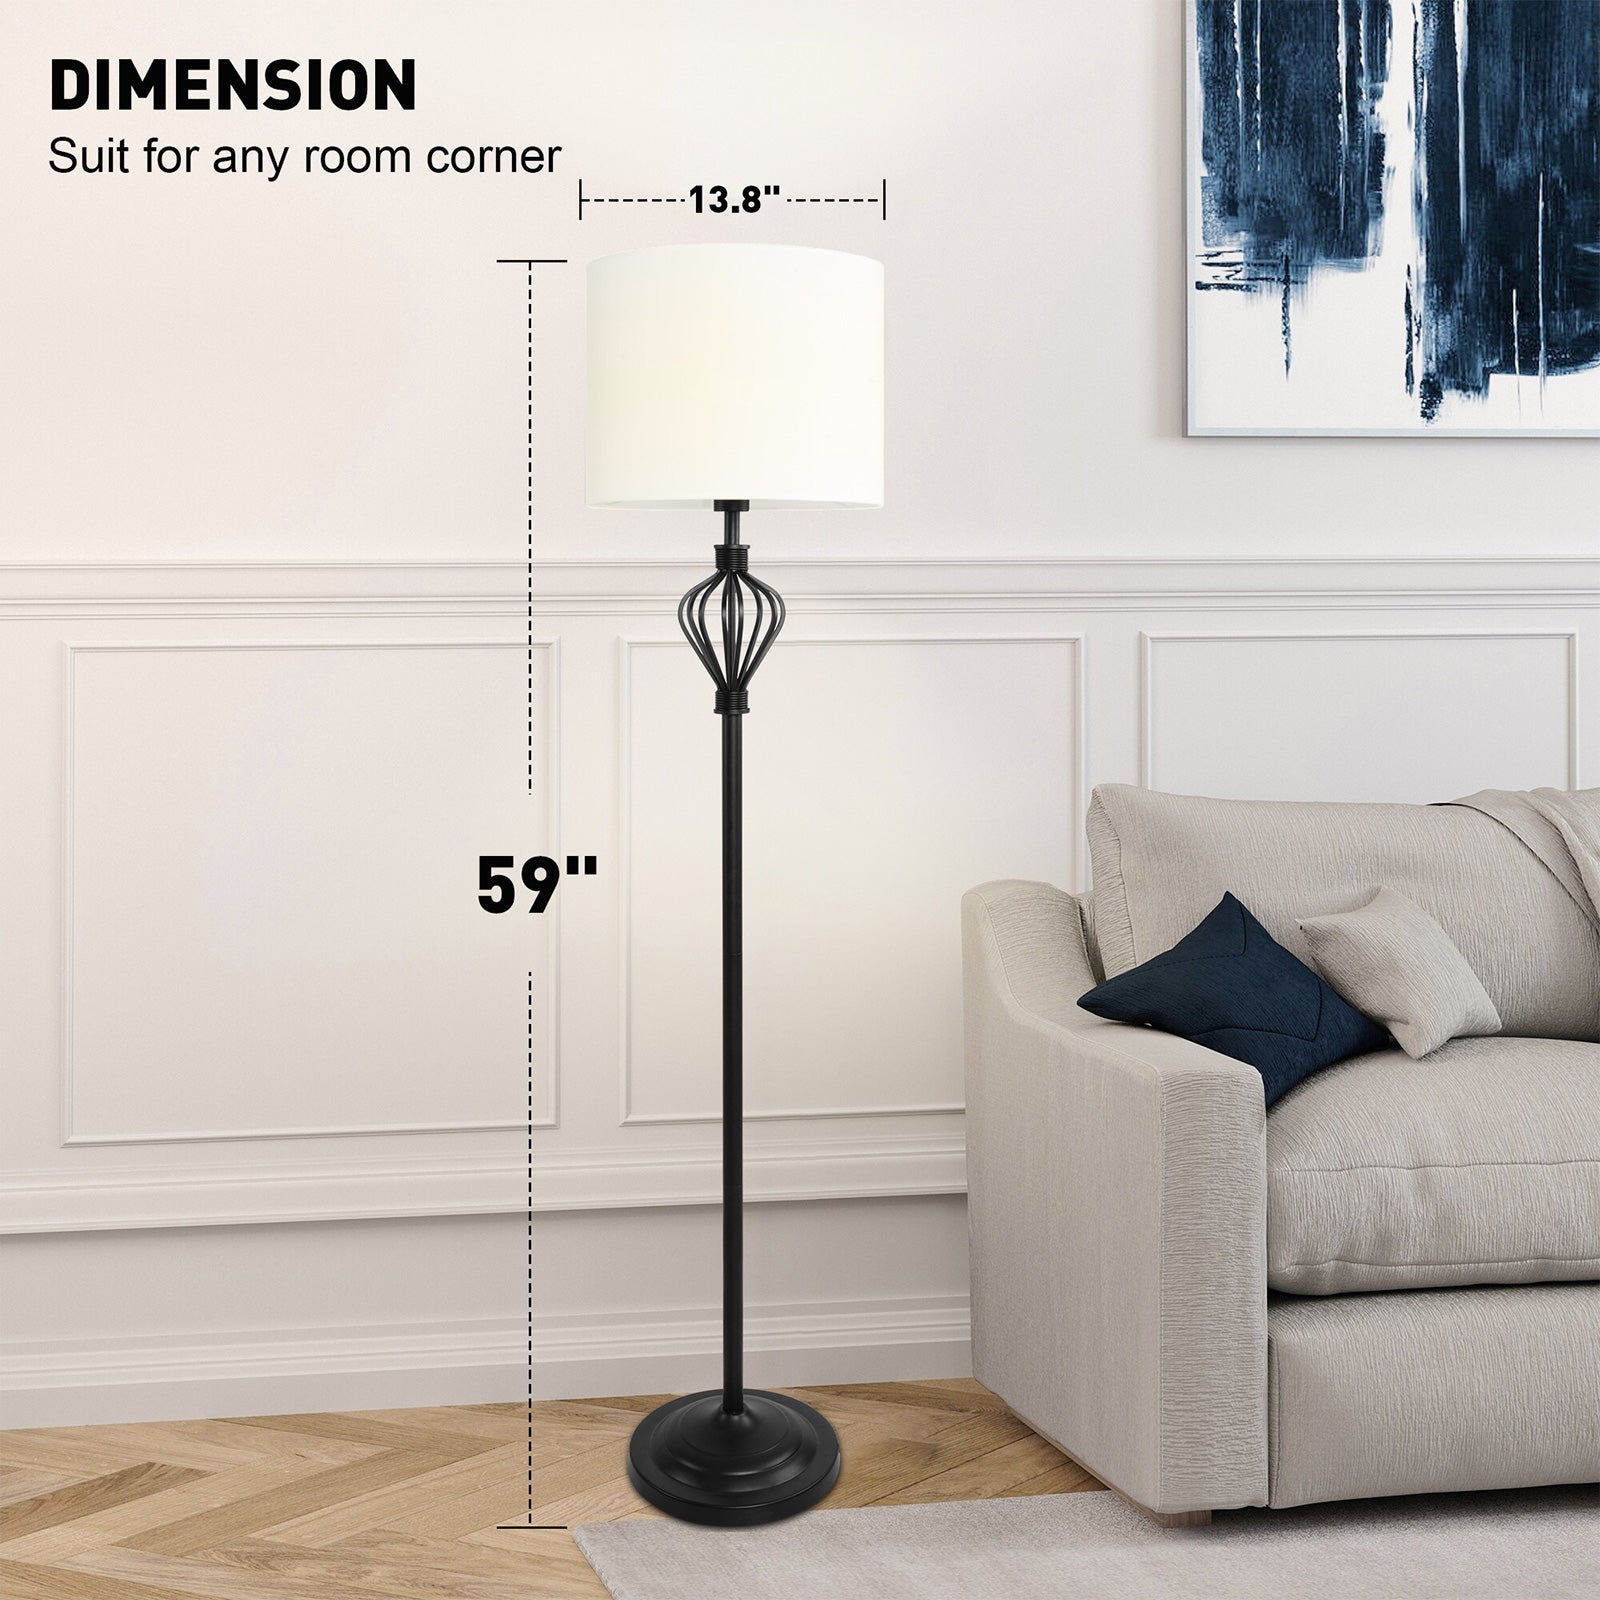 Standing Floor Lamp with 8W LED Bulb Foot Switch Fabric Lamp Shade Tall Stand Up Floor Lamp, Black and White